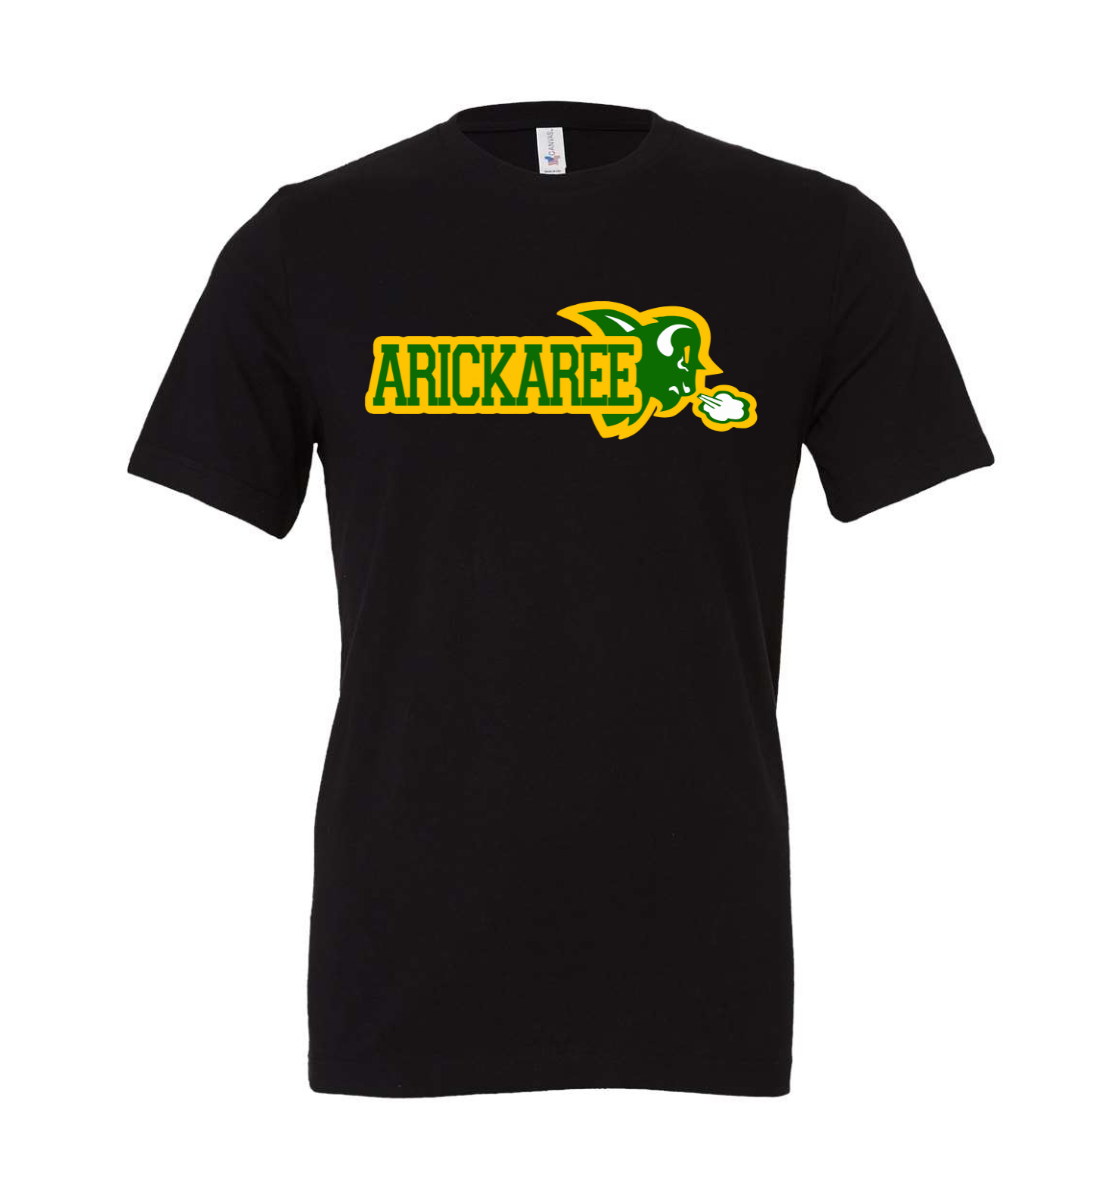 arickaree bison t-shirt: for bison fans only!